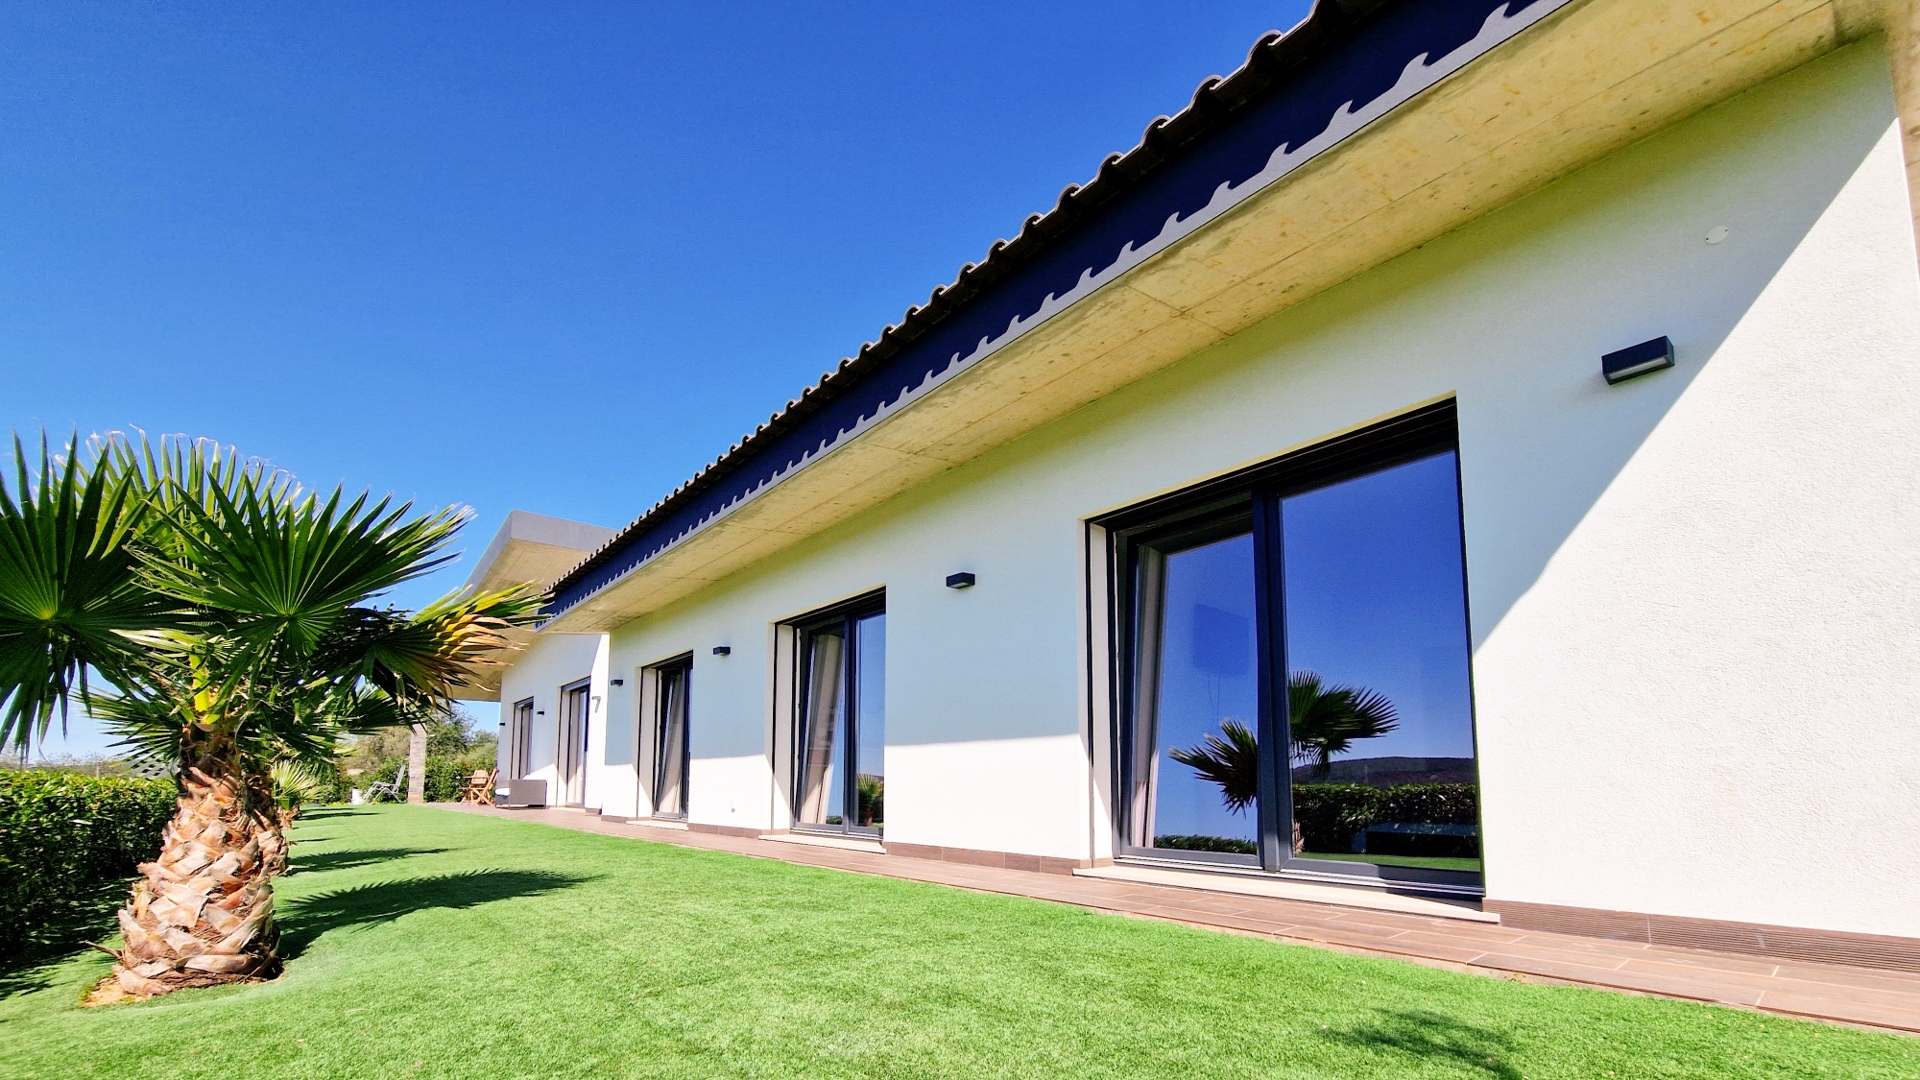 4 Bedroom Contemporary Villa with Panoramic Countryside Views near Loulé, Querença | PTMM125 This newly built contemporary villa enjoys elevated views across the countryside. All on one level. 